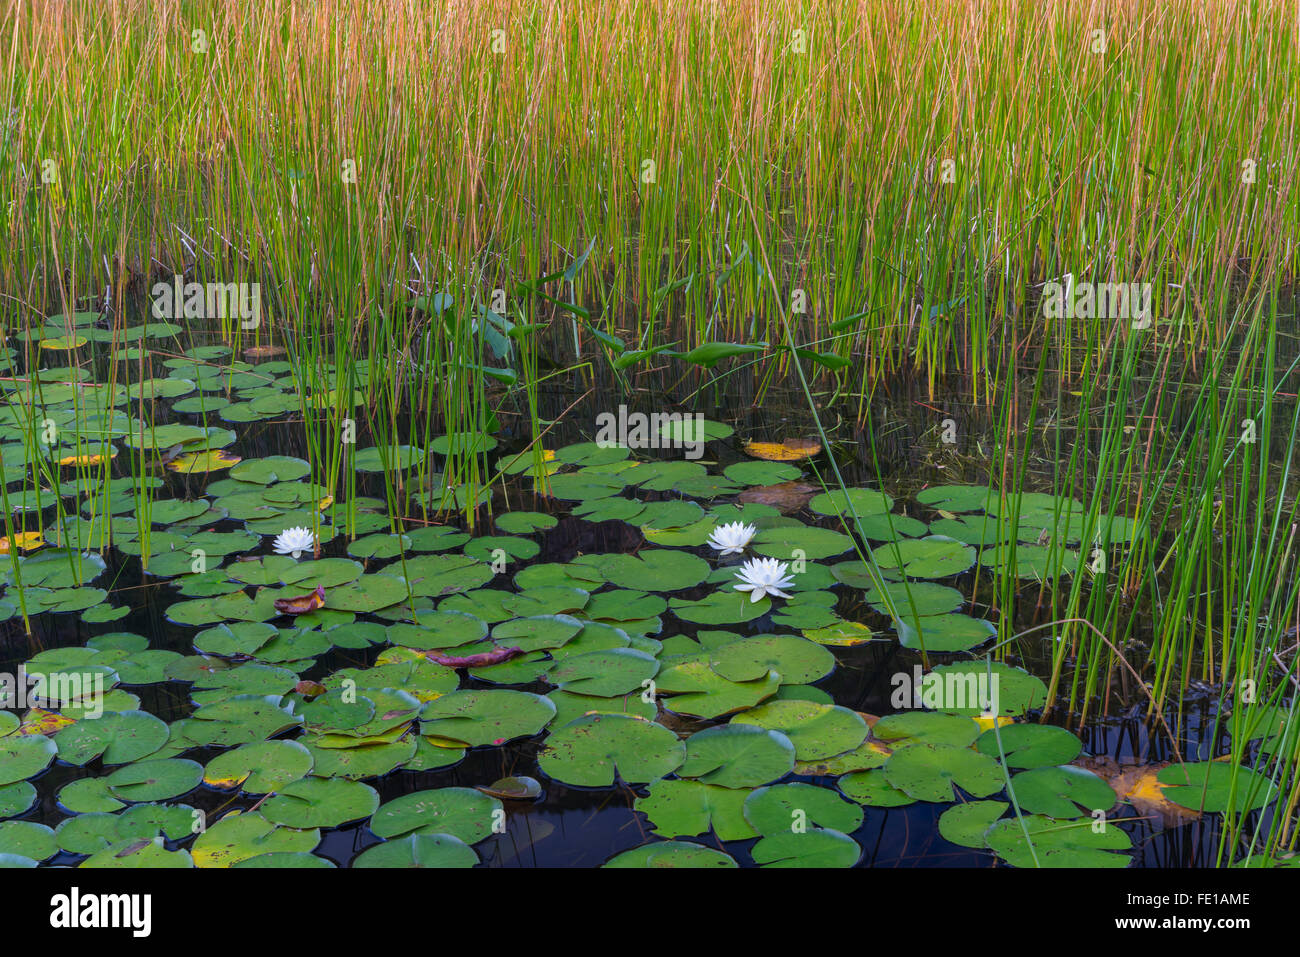 Acadia Naional Park, Maine: Wetland marsh with lily pads and sedges Stock Photo